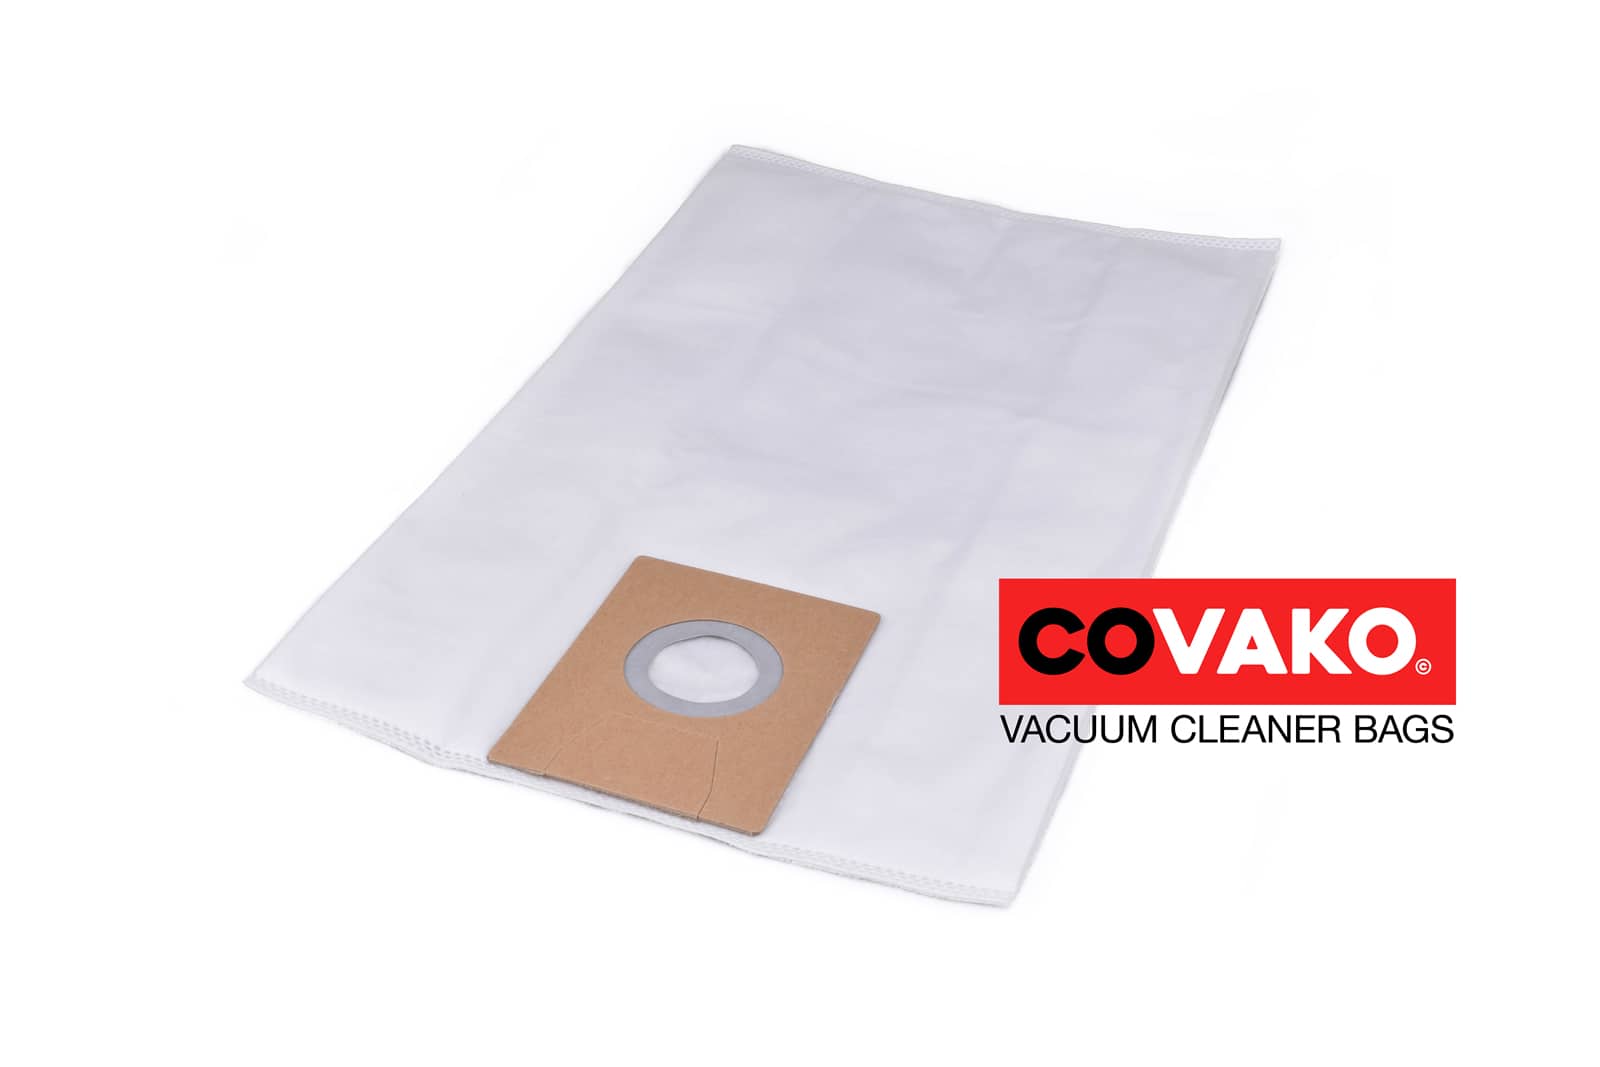 Oehme Otto K103200942 / Synthesis - Oehme Otto vacuum cleaner bags